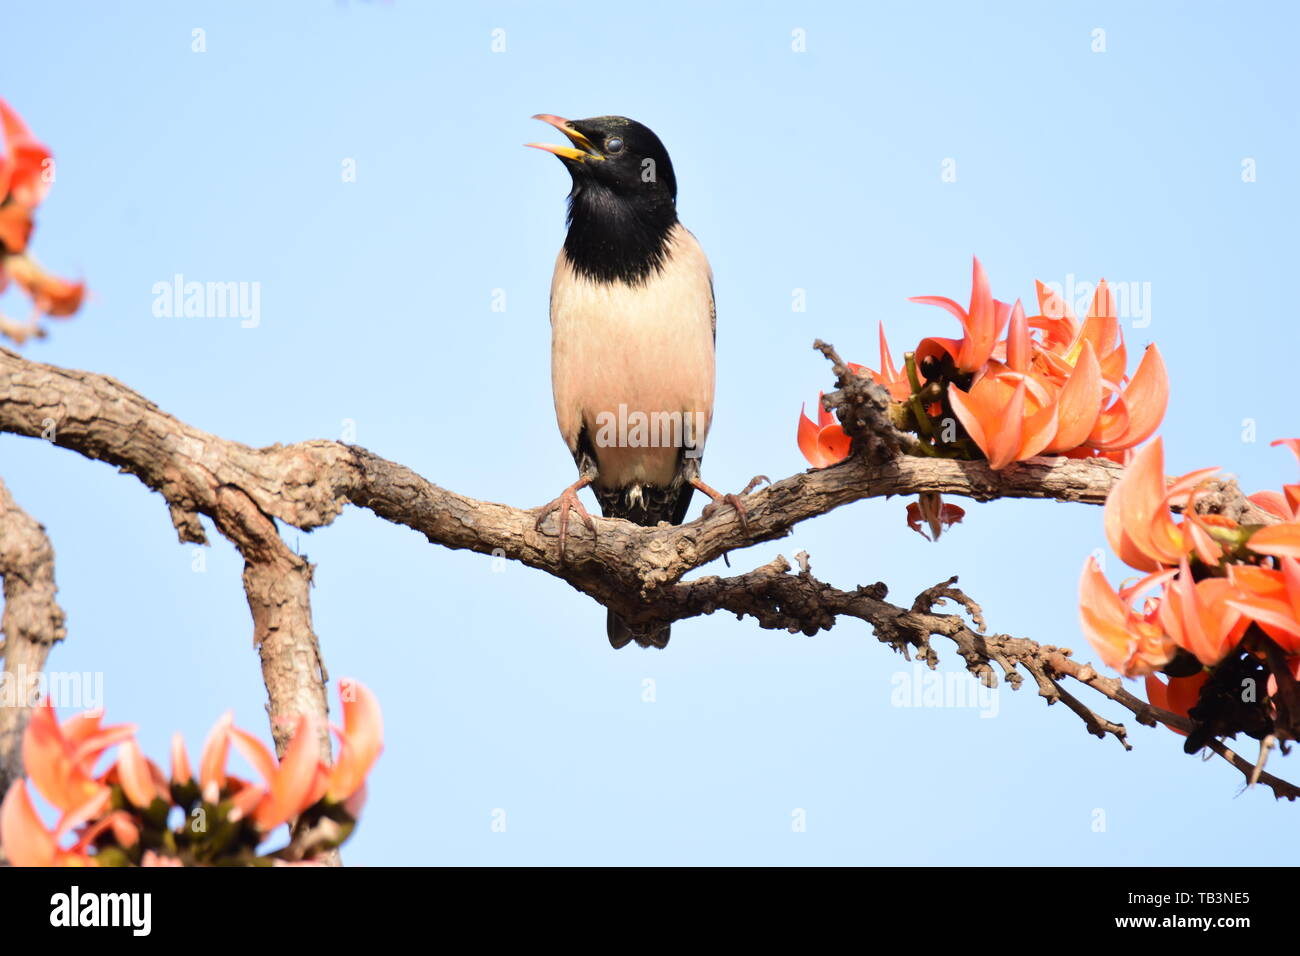 ROSY STARLING ON FLAME-OF-THE FOREST Stock Photo